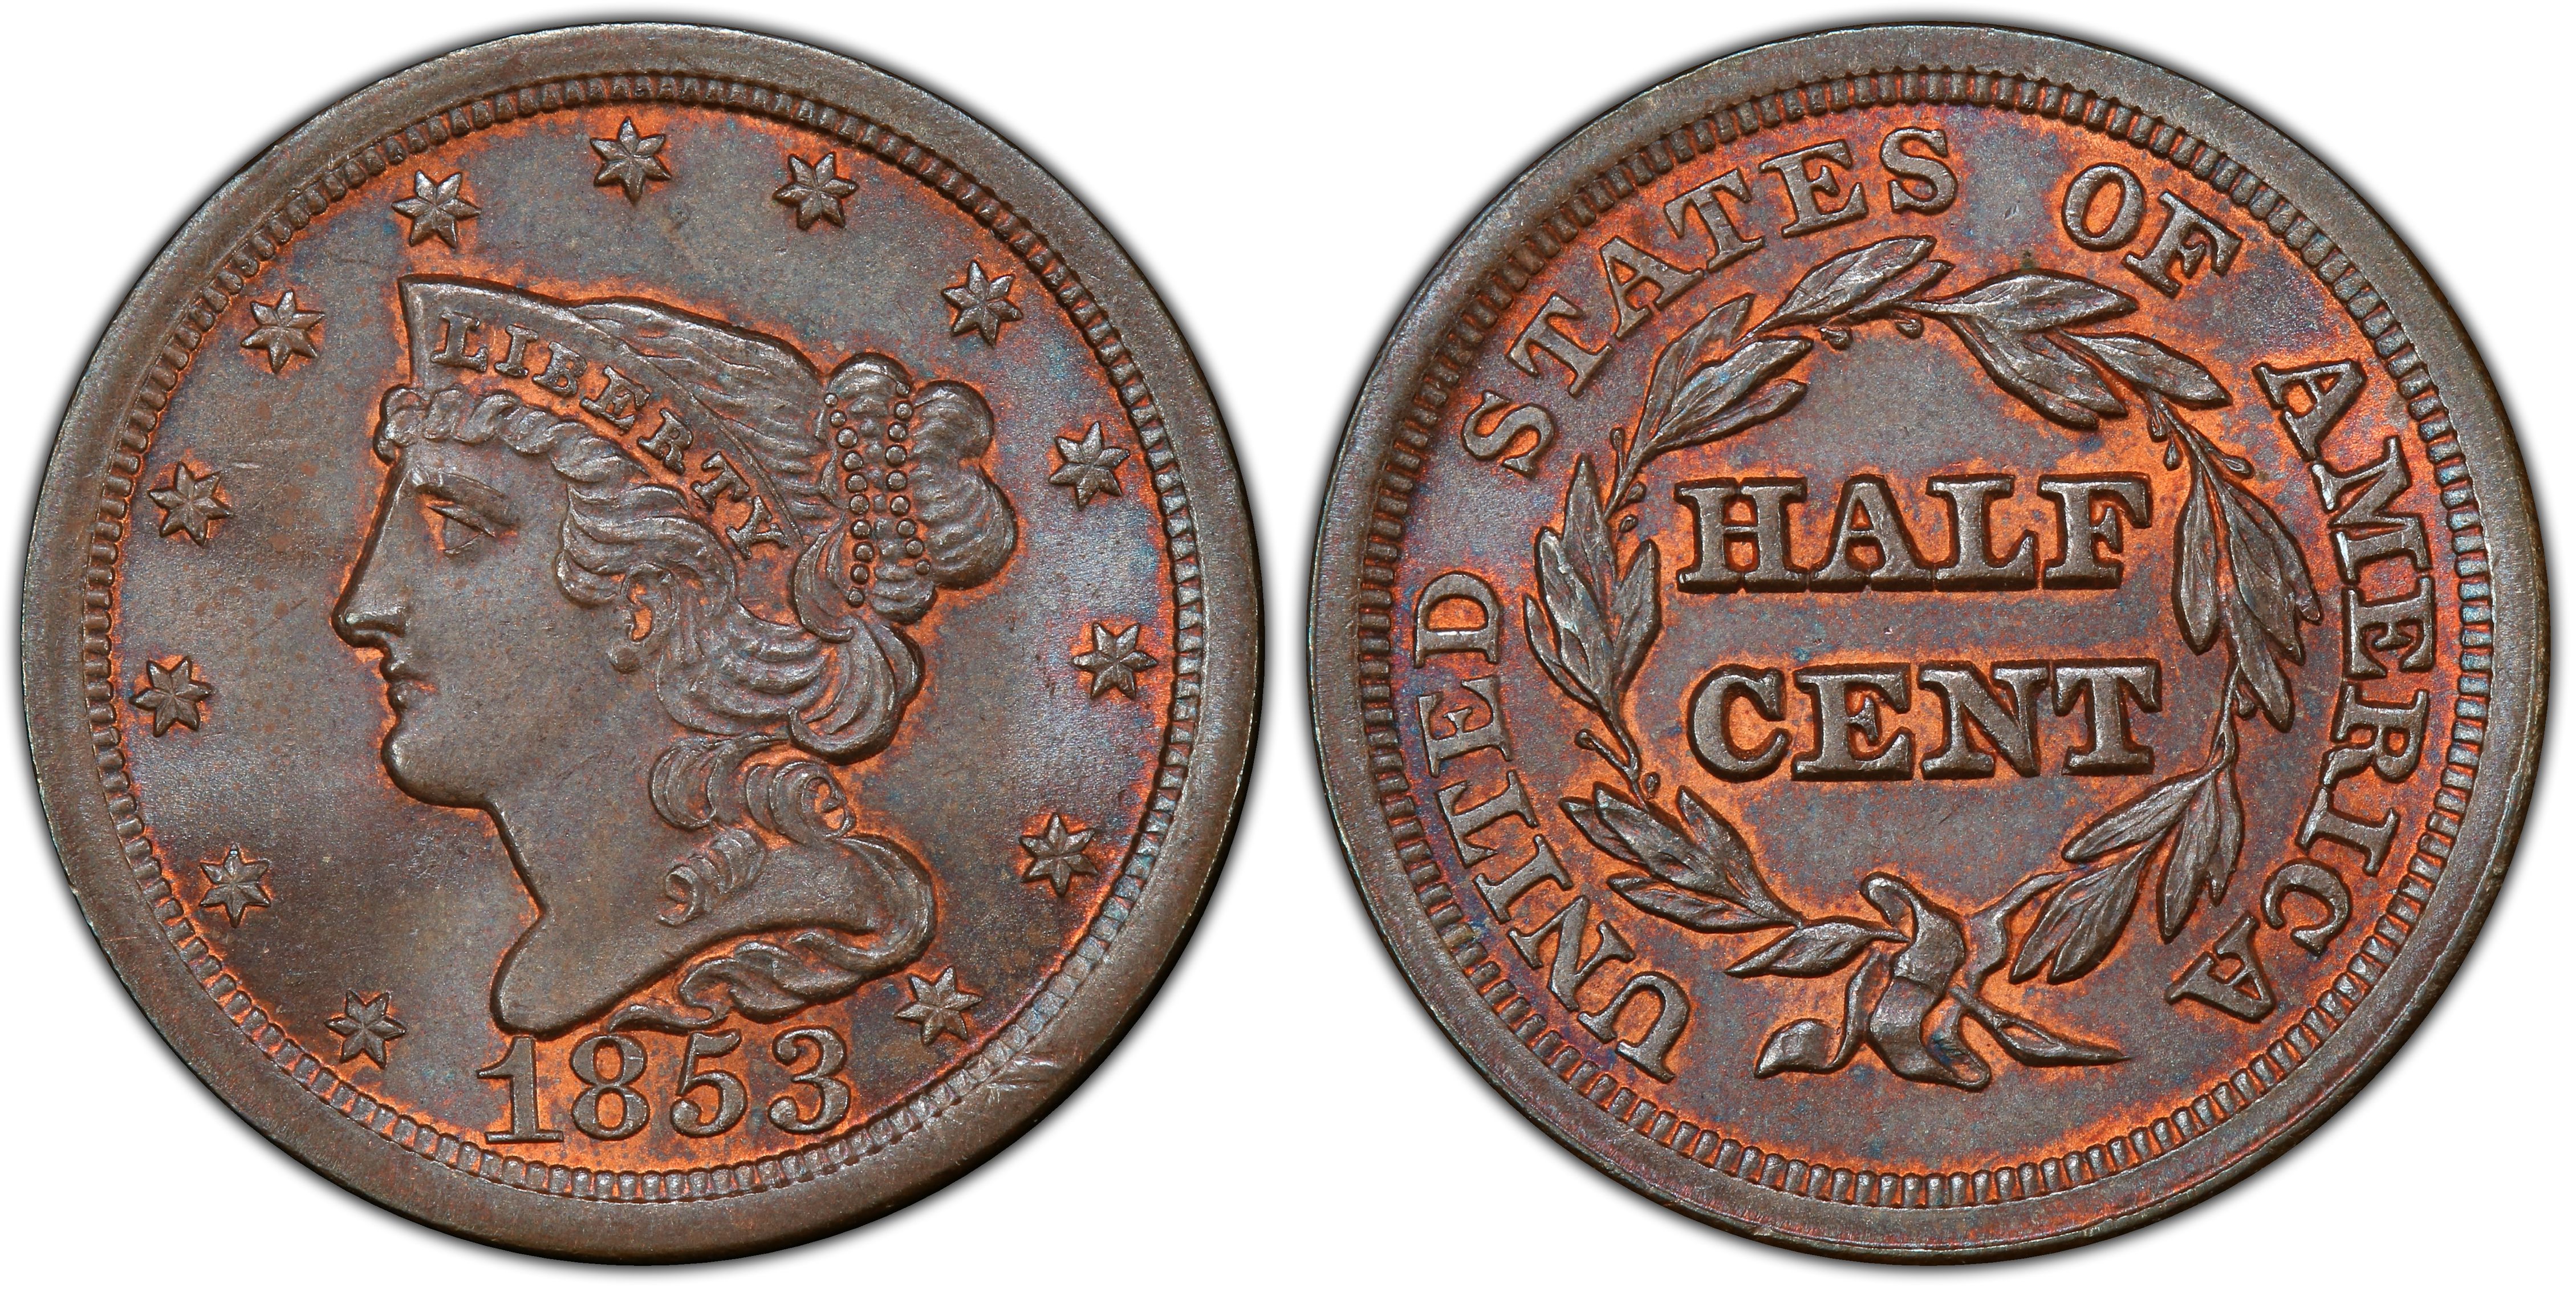 1853 BRAIDED HAIR HALF CENT A VF AMAZING DETAIL! FREE SHIPPING